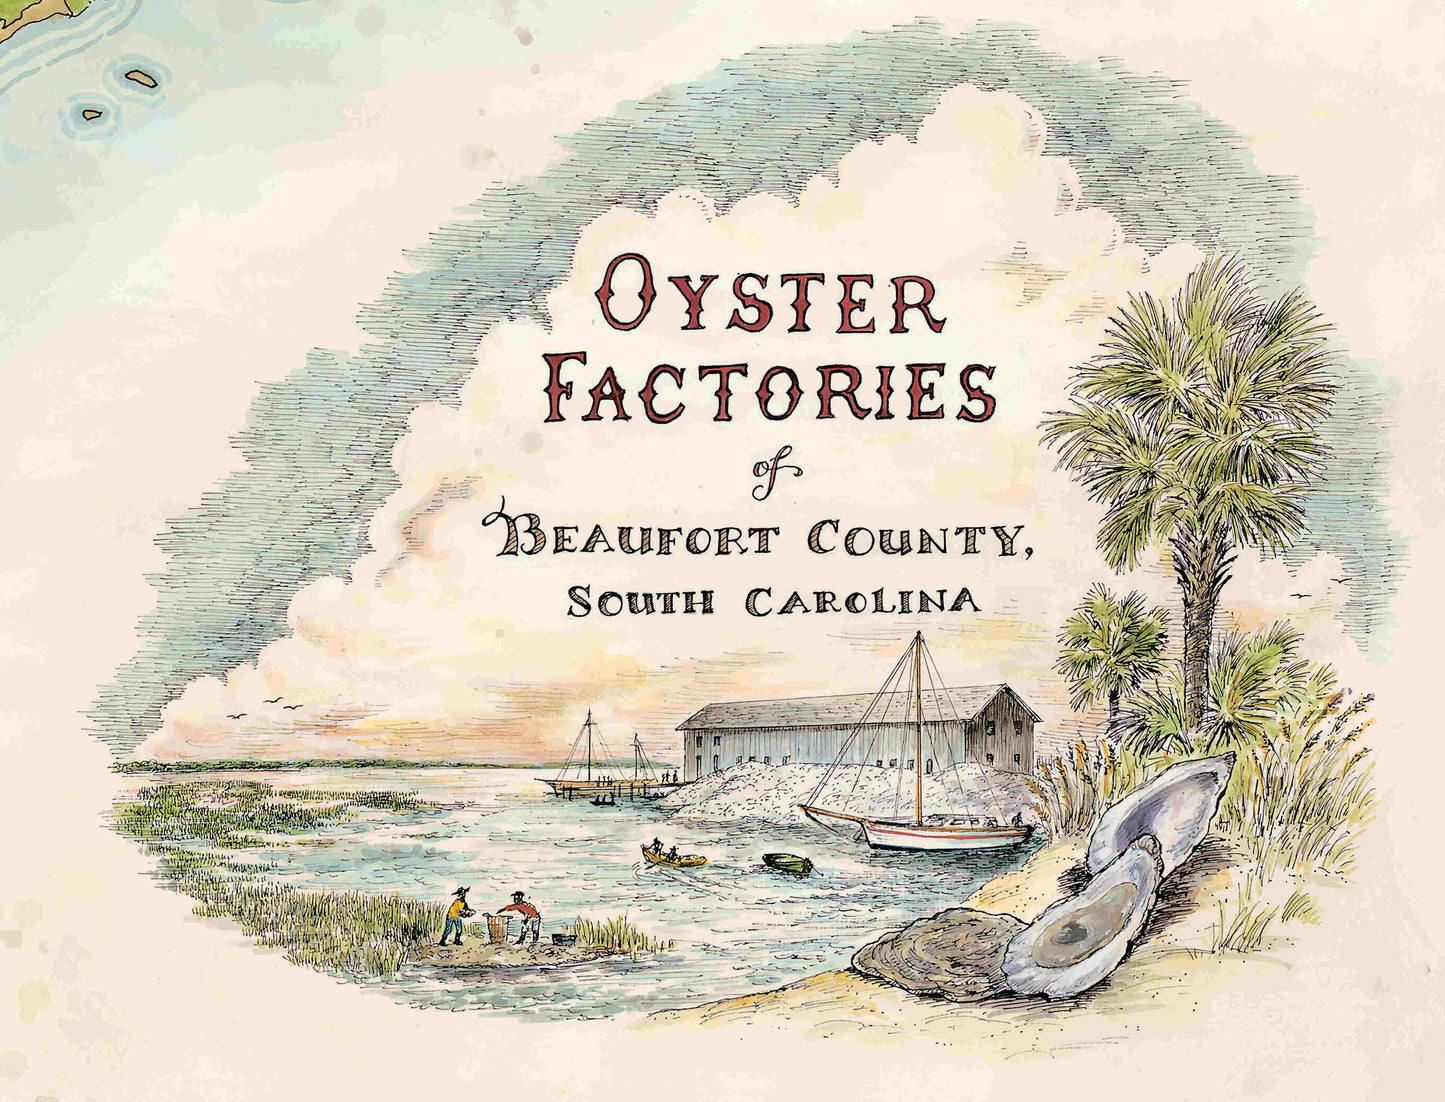 Oyster Factories of Beaufort County, South Carolina